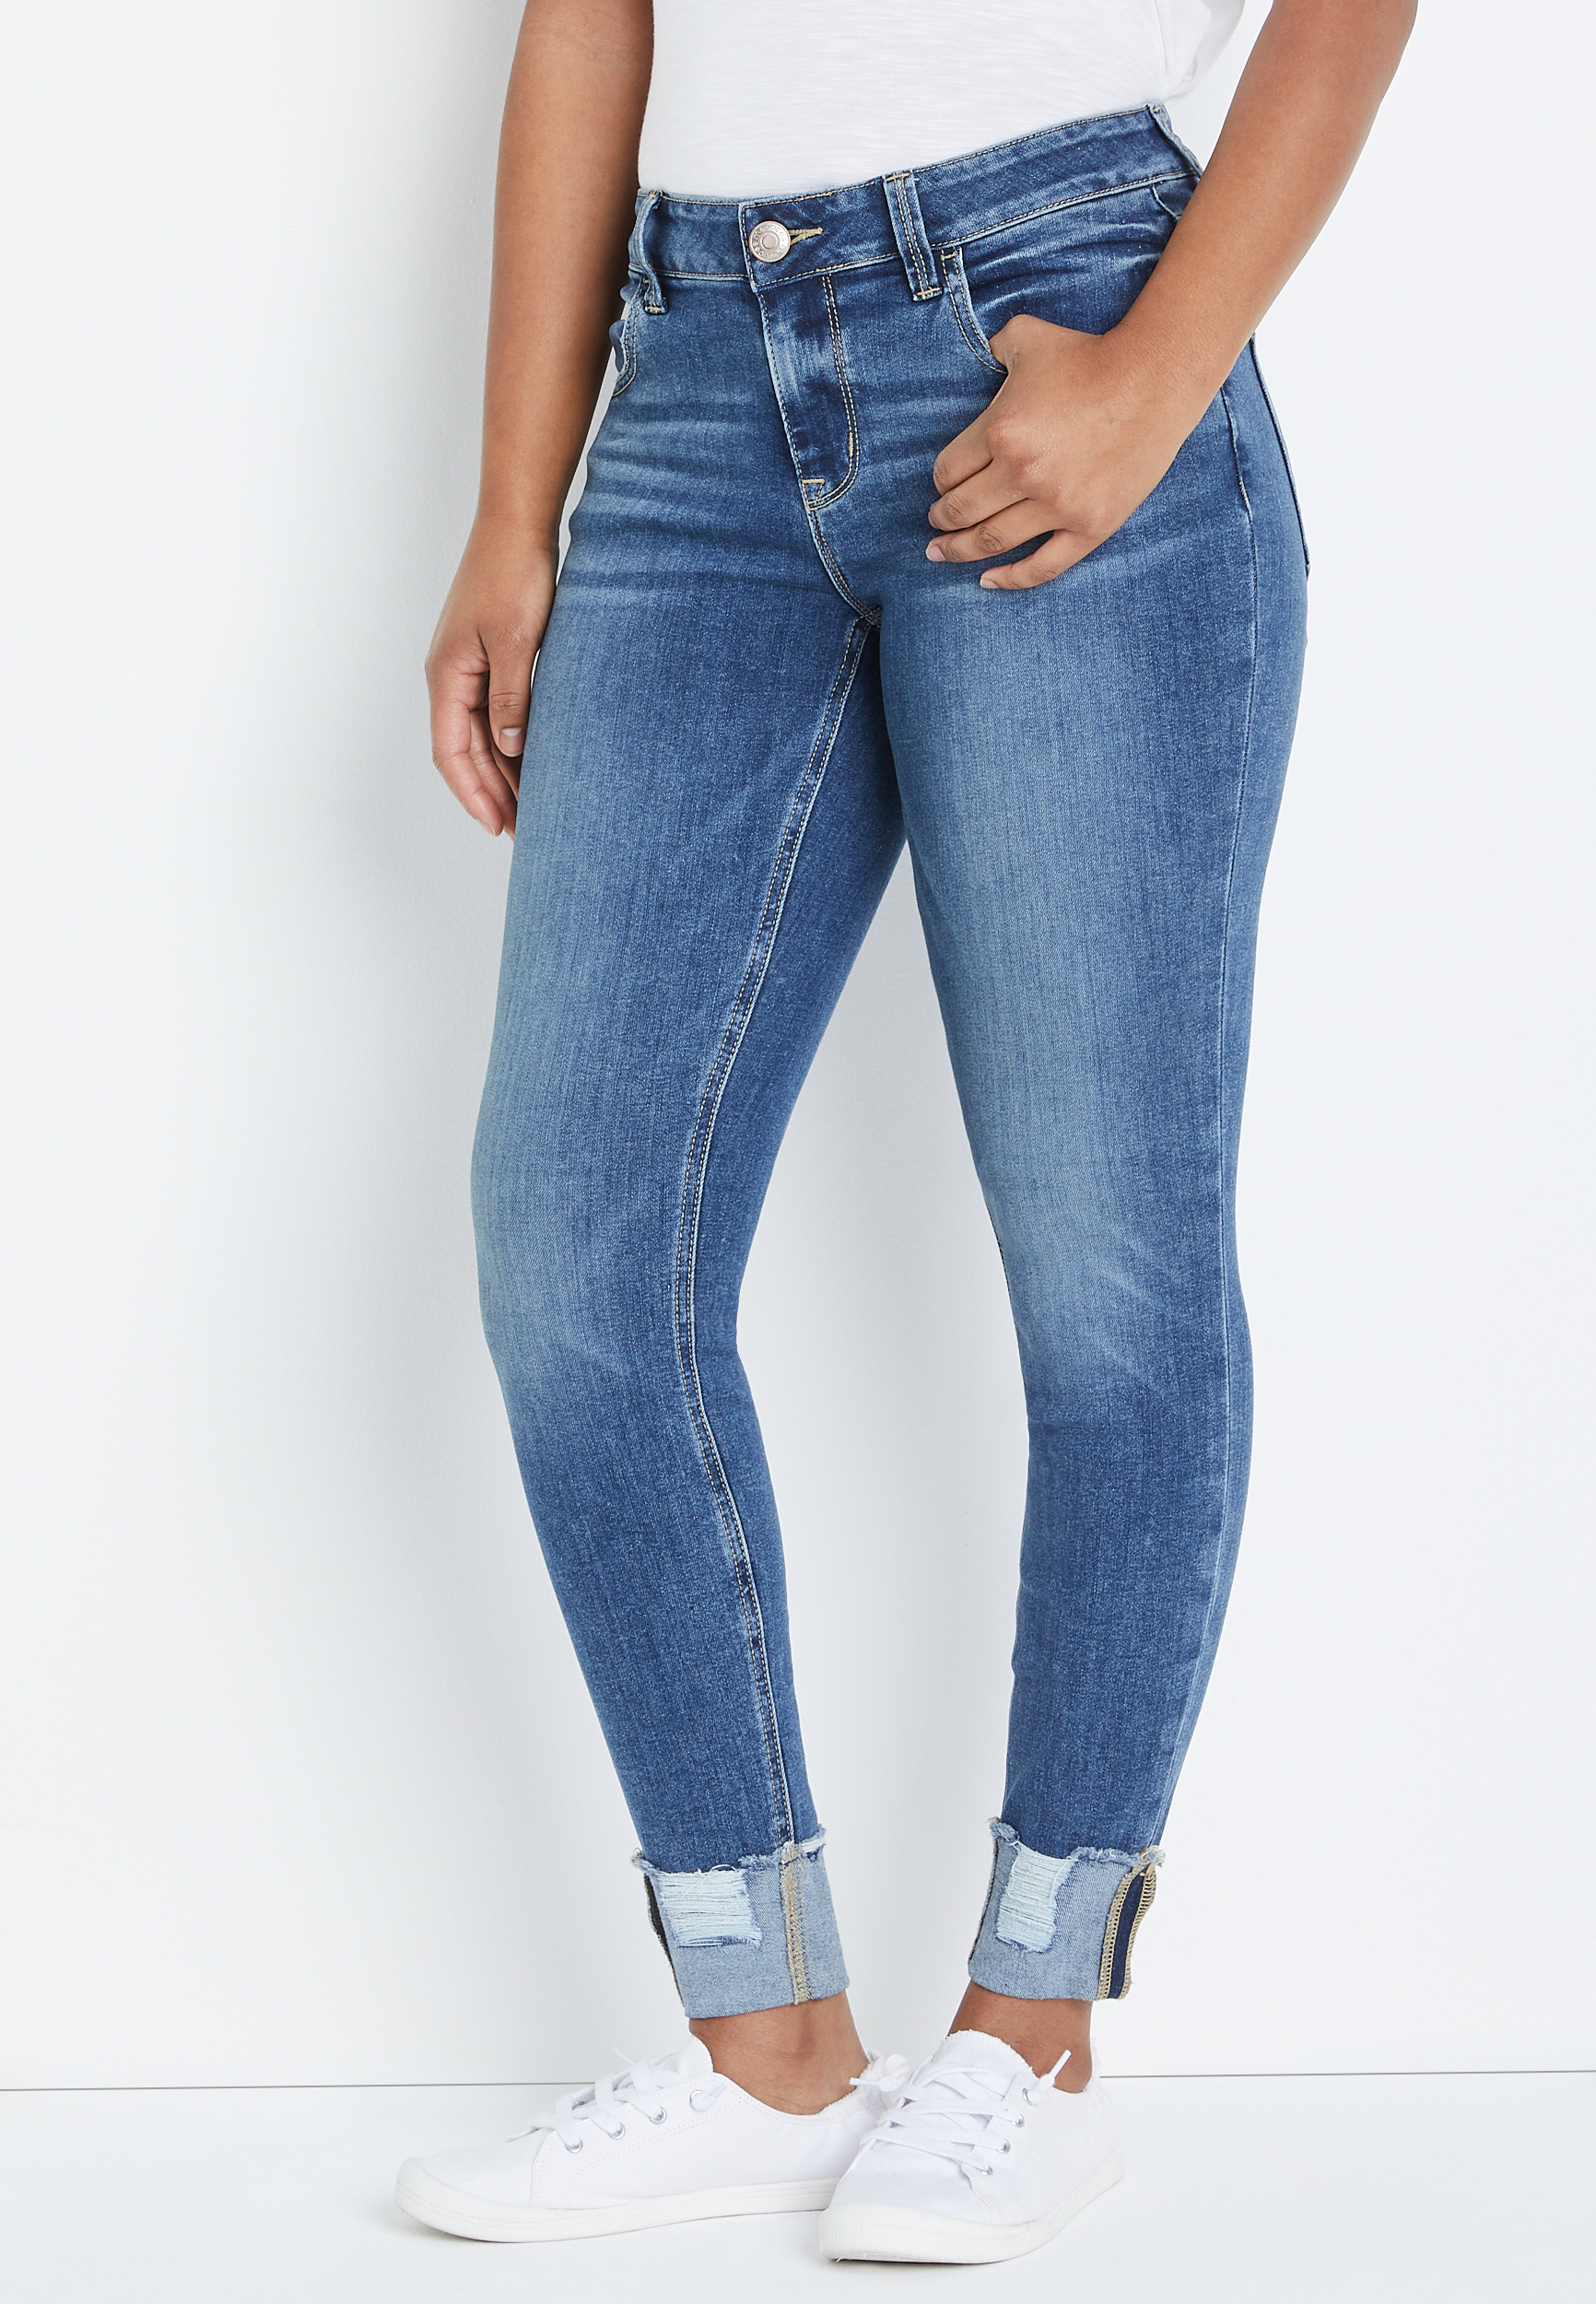 m jeans by maurices™ Cool Comfort Mid Rise Cuffed Hem Jegging | maurices